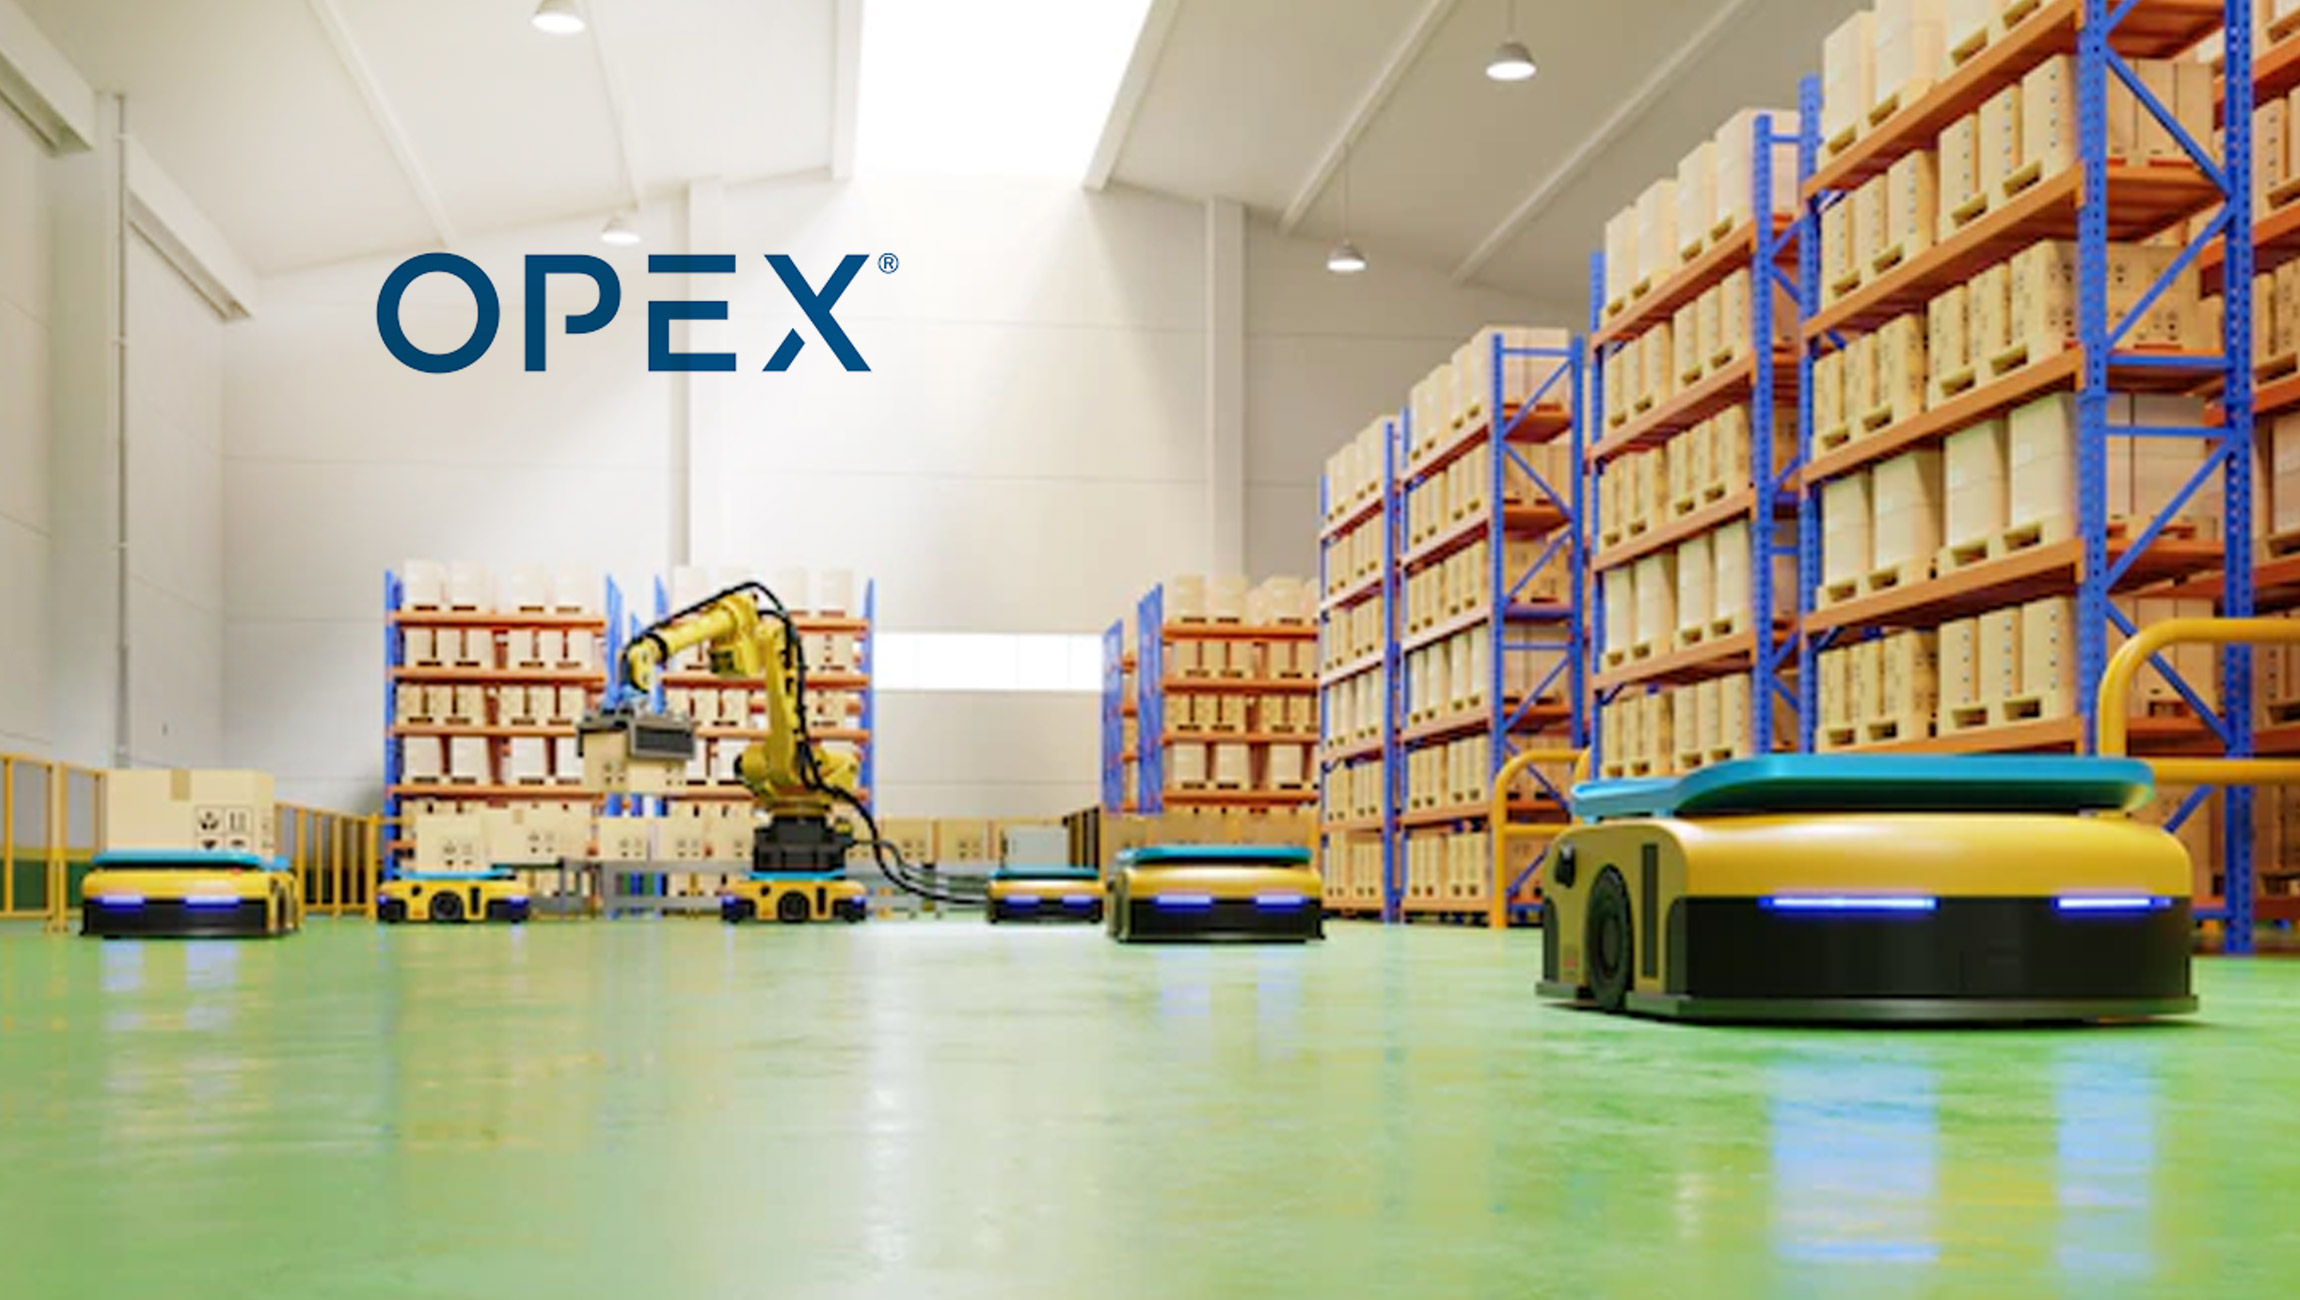 OPEX Enhances Warehouse Automation Sorting Technology to Incorporate RFID Scanning